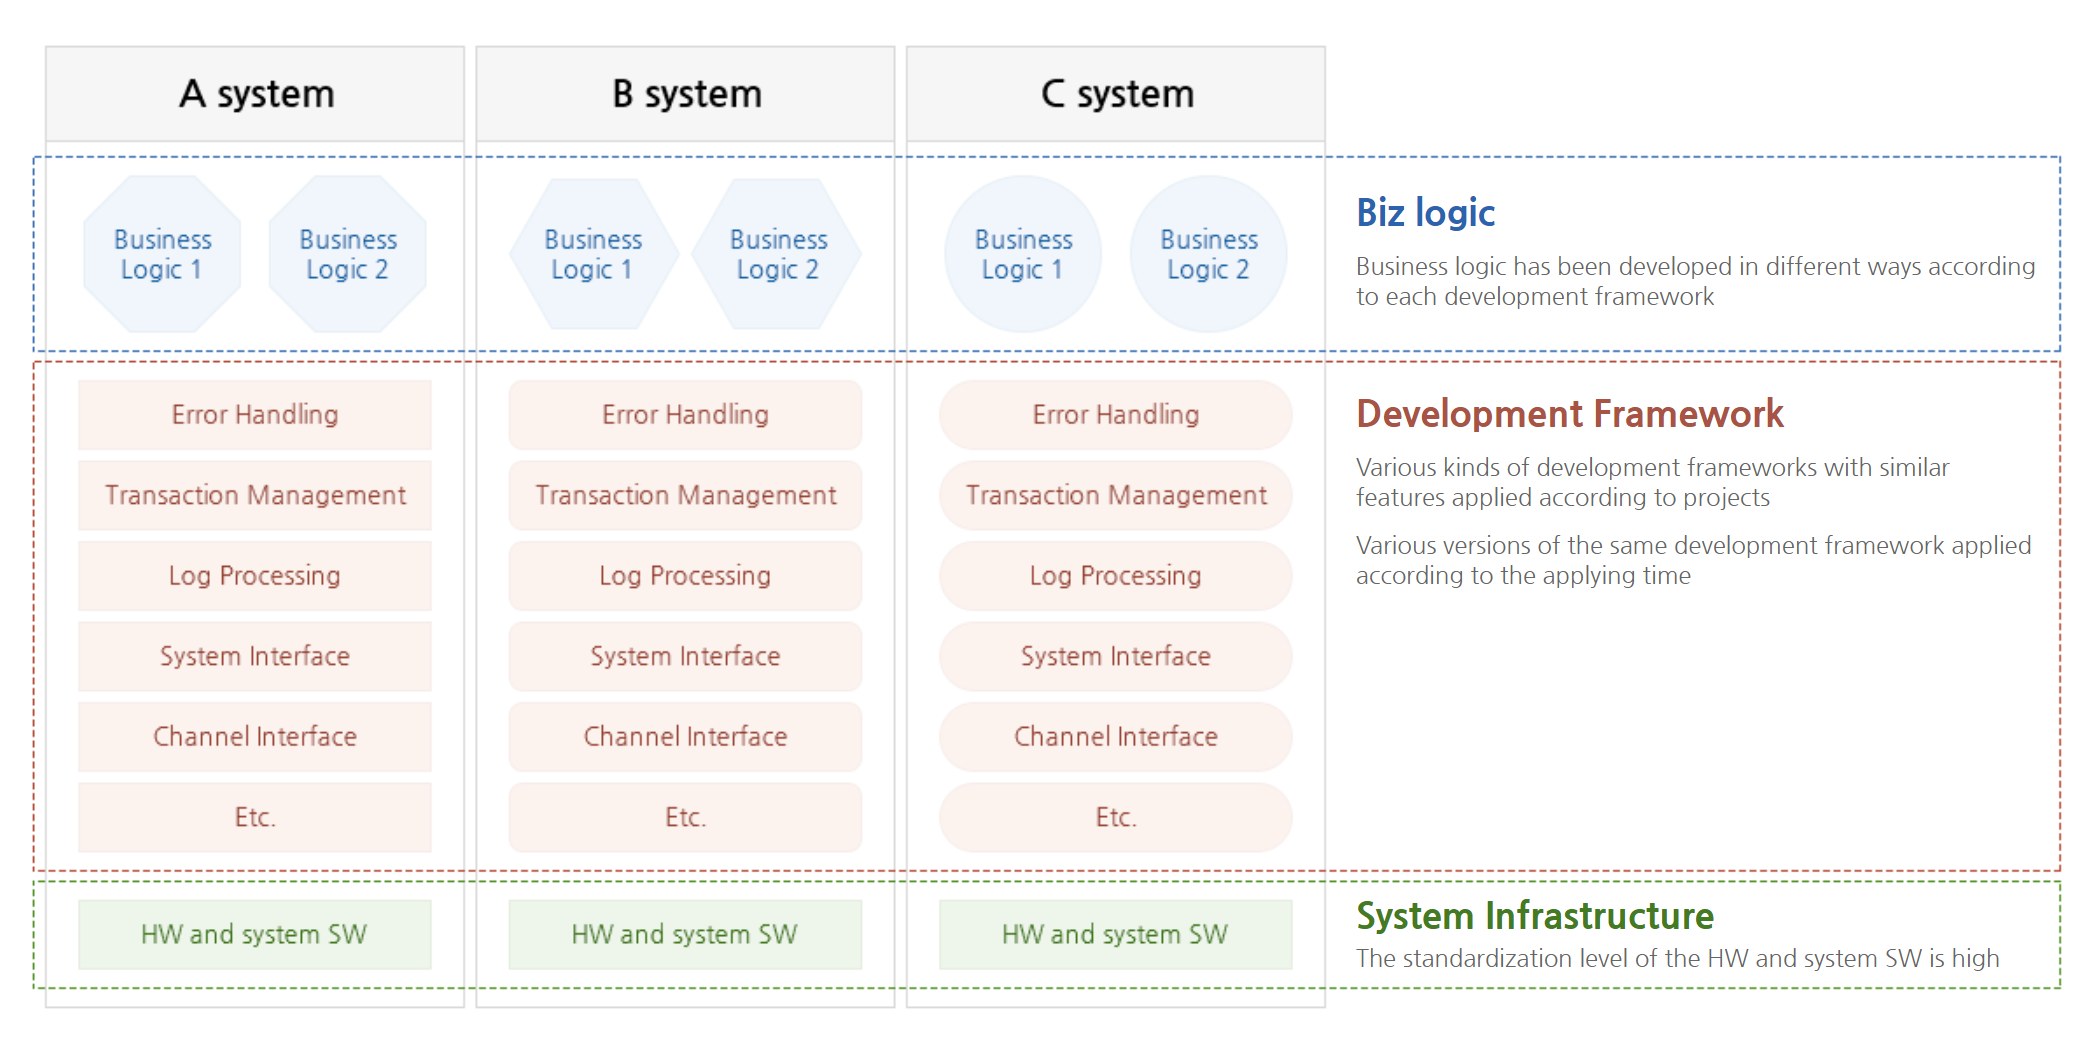 Biz logic : Business logic has been developed in different ways according to each development framework. Development Framework : Various kinds of development frameworks with similar features applied according to projects. Various versions of the same development framework applied according to the applying time. System Infrastructure : The standardization level of the HW and system SW is high.